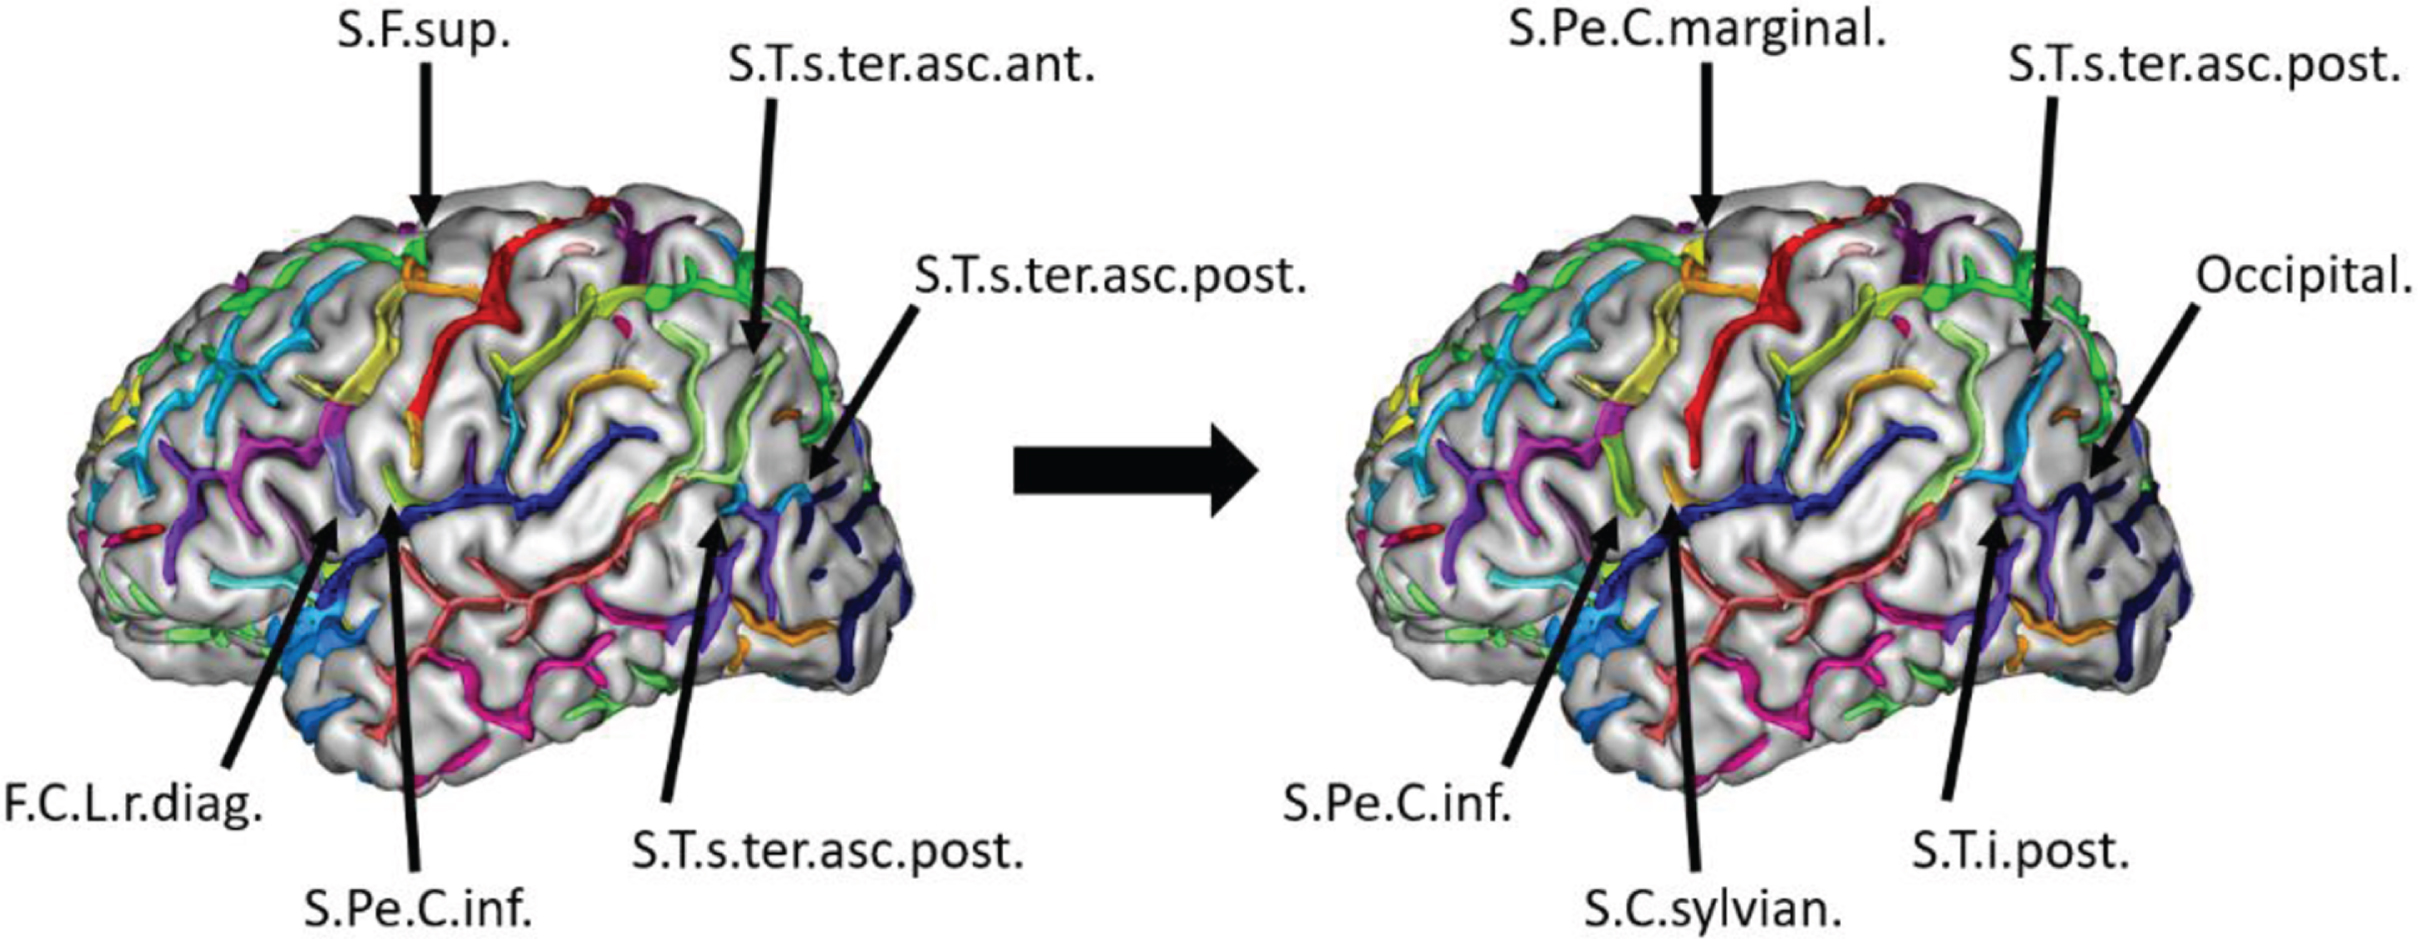 Example of the relabeling performed on sulcal nodes in the left hemisphere of a converter MCI patient. The colors correspond to those of the BrainVISA atlas. The anterior and posterior branches of the superior temporal sulcus (S.T.s.) were relabeled, as well as a portion of the posterior inferior temporal suclus (S.T.i.post.) and the occipital sulcus; in the frontal area, the classification of the central sylvian sulcus (S.C.sylvian.) and the inferior precentral sulcus (S.Pe.C.inf) were corrected. S.F.sup., superior frontal sulcus; S.T.s.ter.asc.ant., anterior terminal ascending branch of the superior temporal sulcus; S.T.s.ter.asc.post., posterior terminal ascending branch of the superior temporal sulcus; S.Pe.C.inf., inferior precentral sulcus; F.C.L.r.diag., diagonal ramus of the lateral fissure; S.Pe.C.marginal., marginal precentral sulcus.